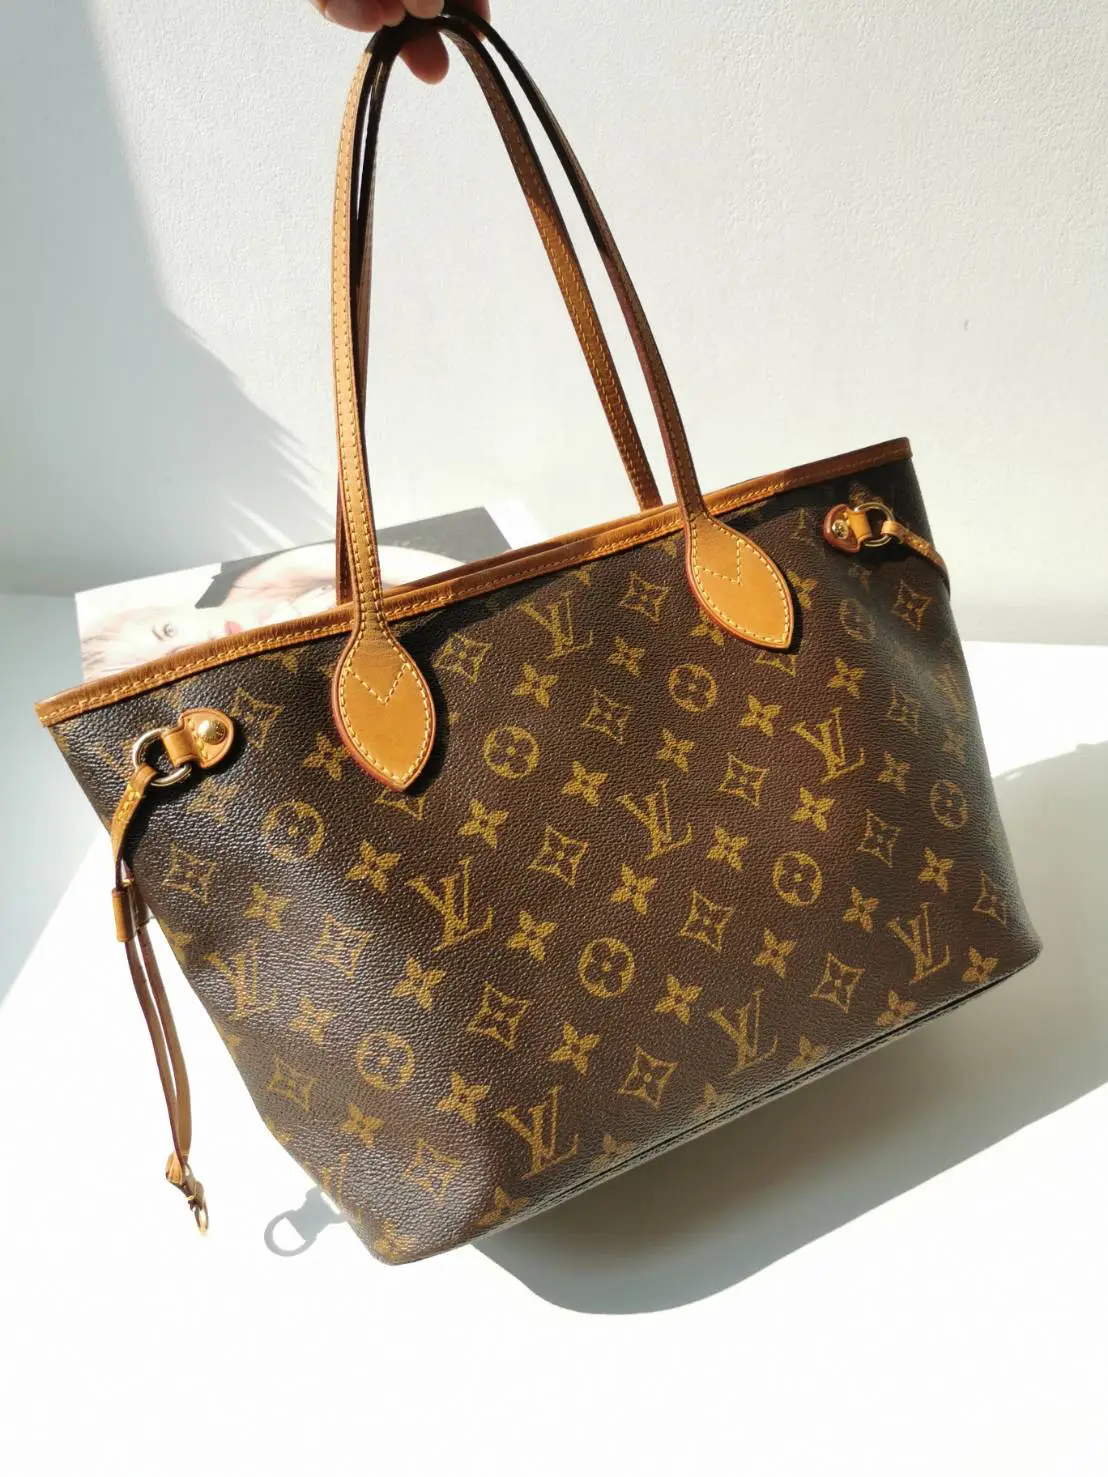 I love my neverfull, I wish it were monogrammed though. So chic